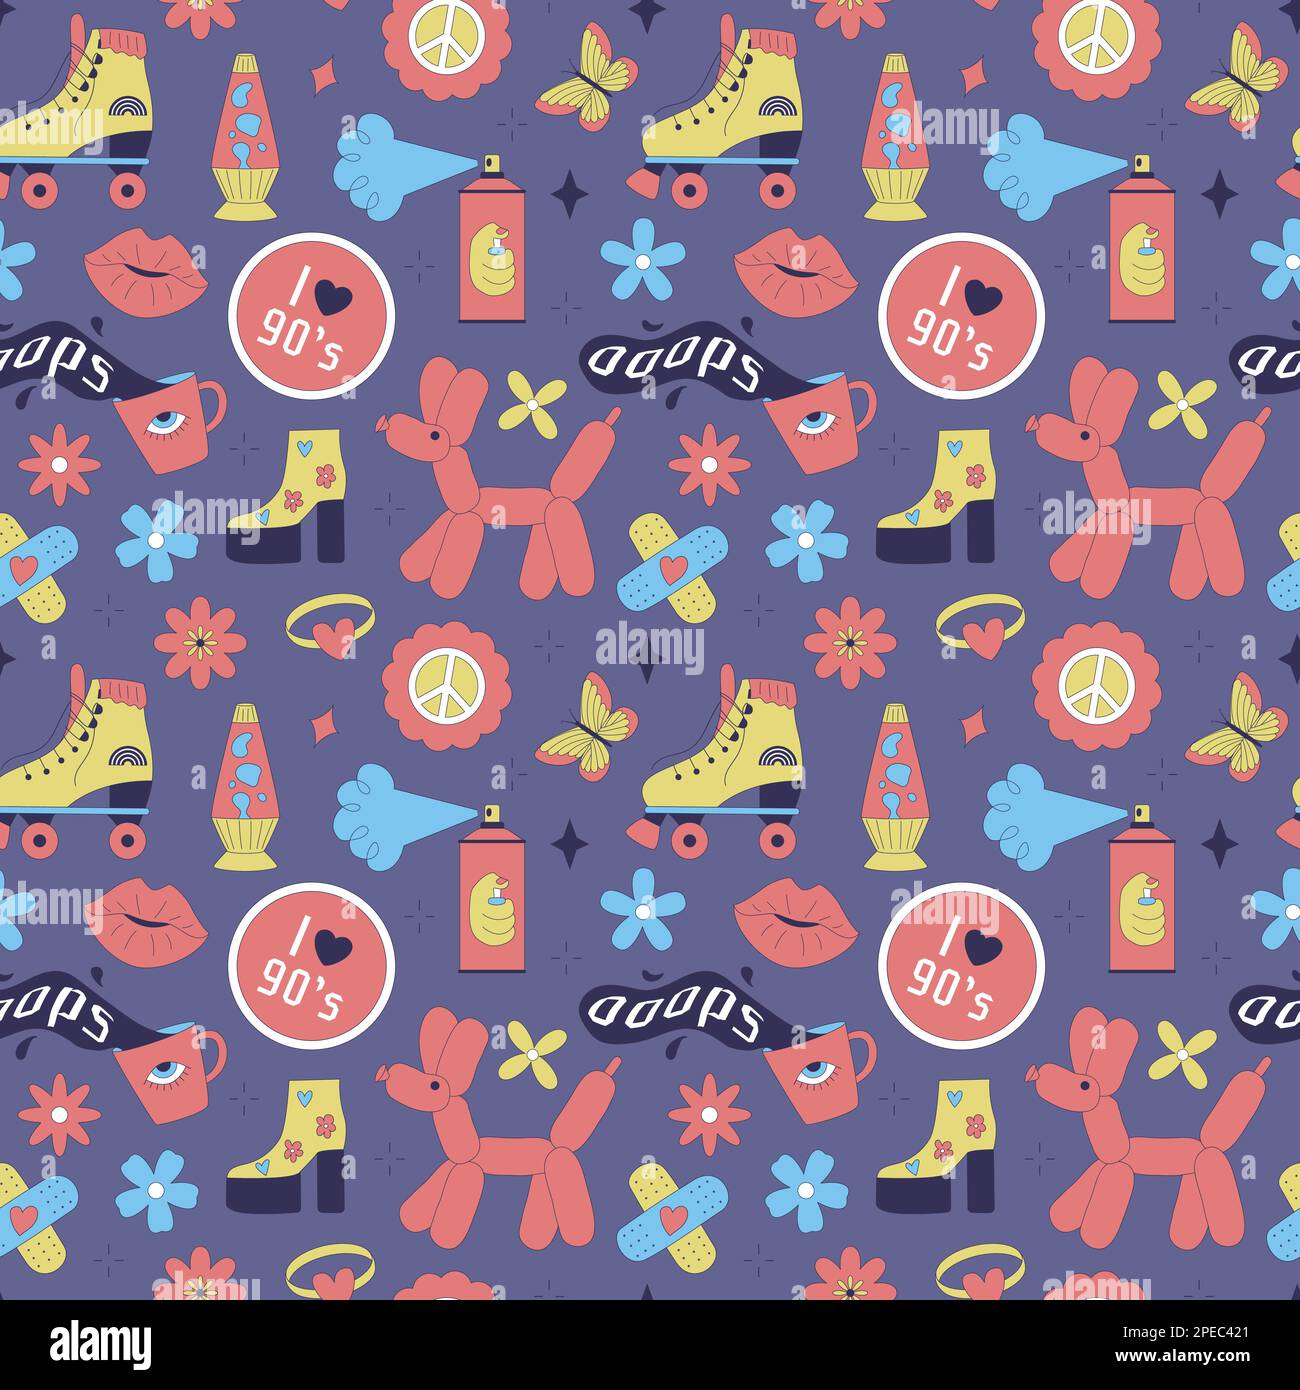 Seamless pattern with y2k style elements. Acidic vivid neon colors. Bright youth pattern with 90 s characters. Roller skates, lava lamp, high platform Stock Vector